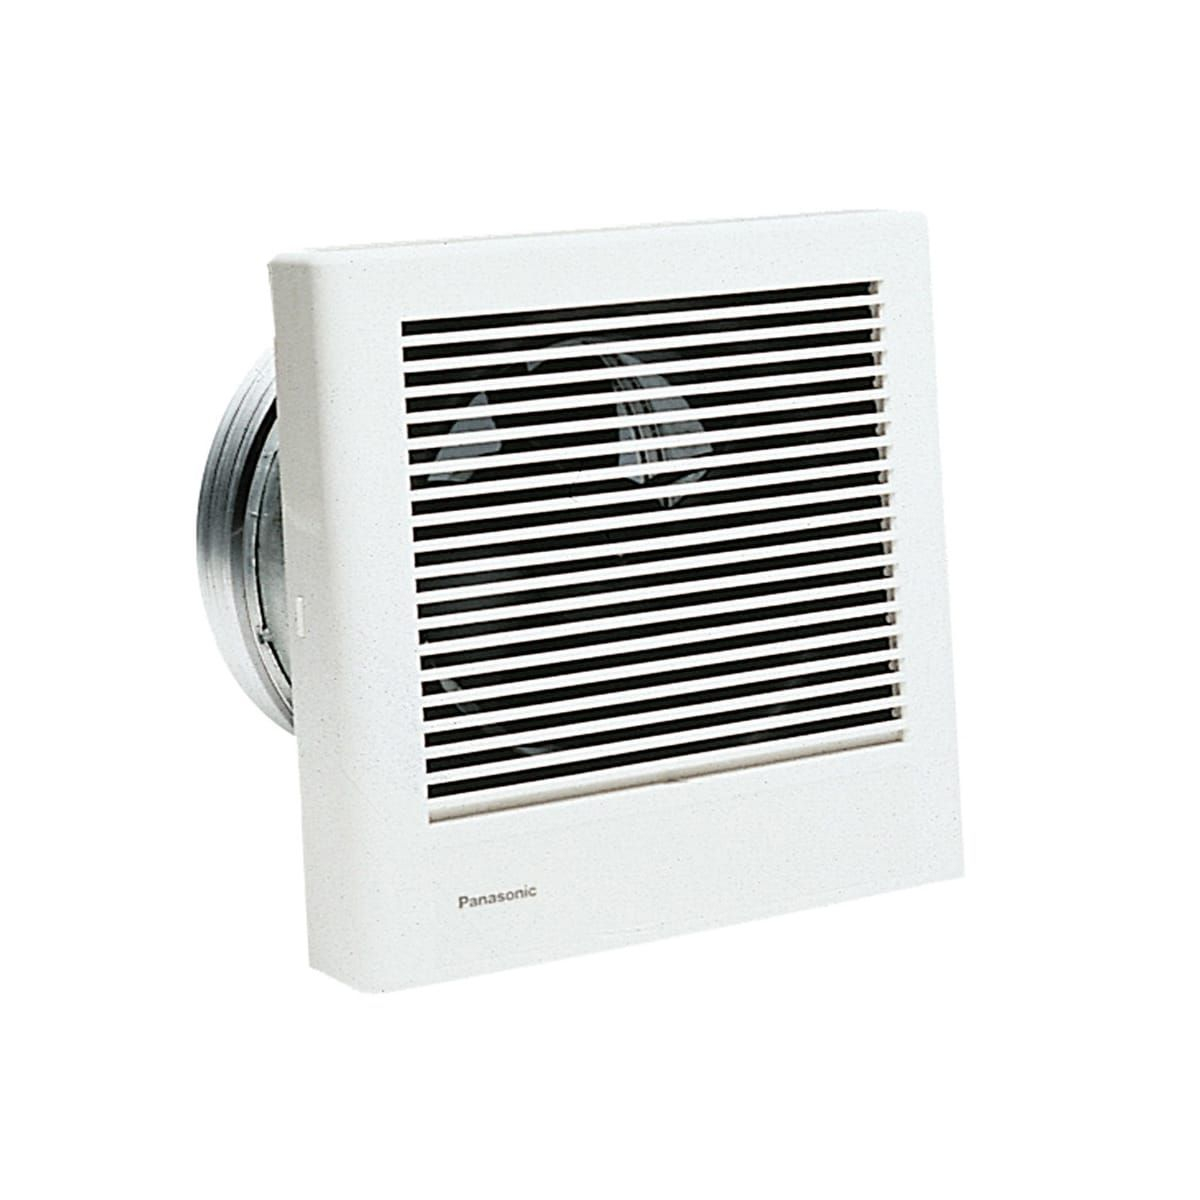 Panasonic Fv 08wq1 In 2019 Beach Ct Bathroom Exhaust Fan within proportions 1200 X 1200